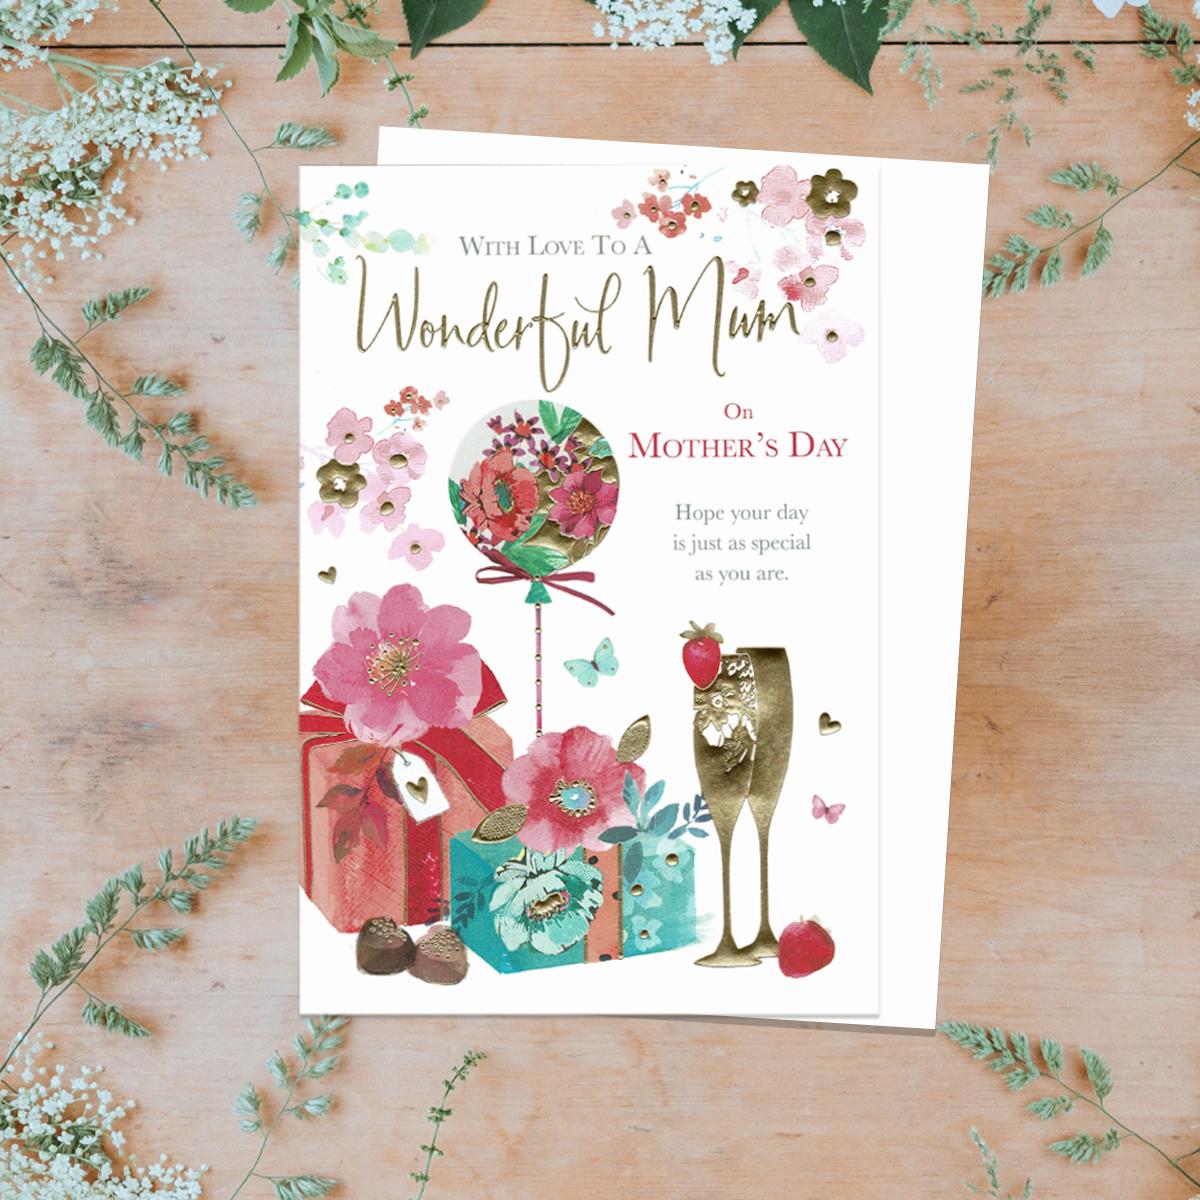 'With Love To A Wonderful Mum On Mother's Day' card showing a balloon, gifts and flutes. Beautiful Colour and gold foil detail with white envelope